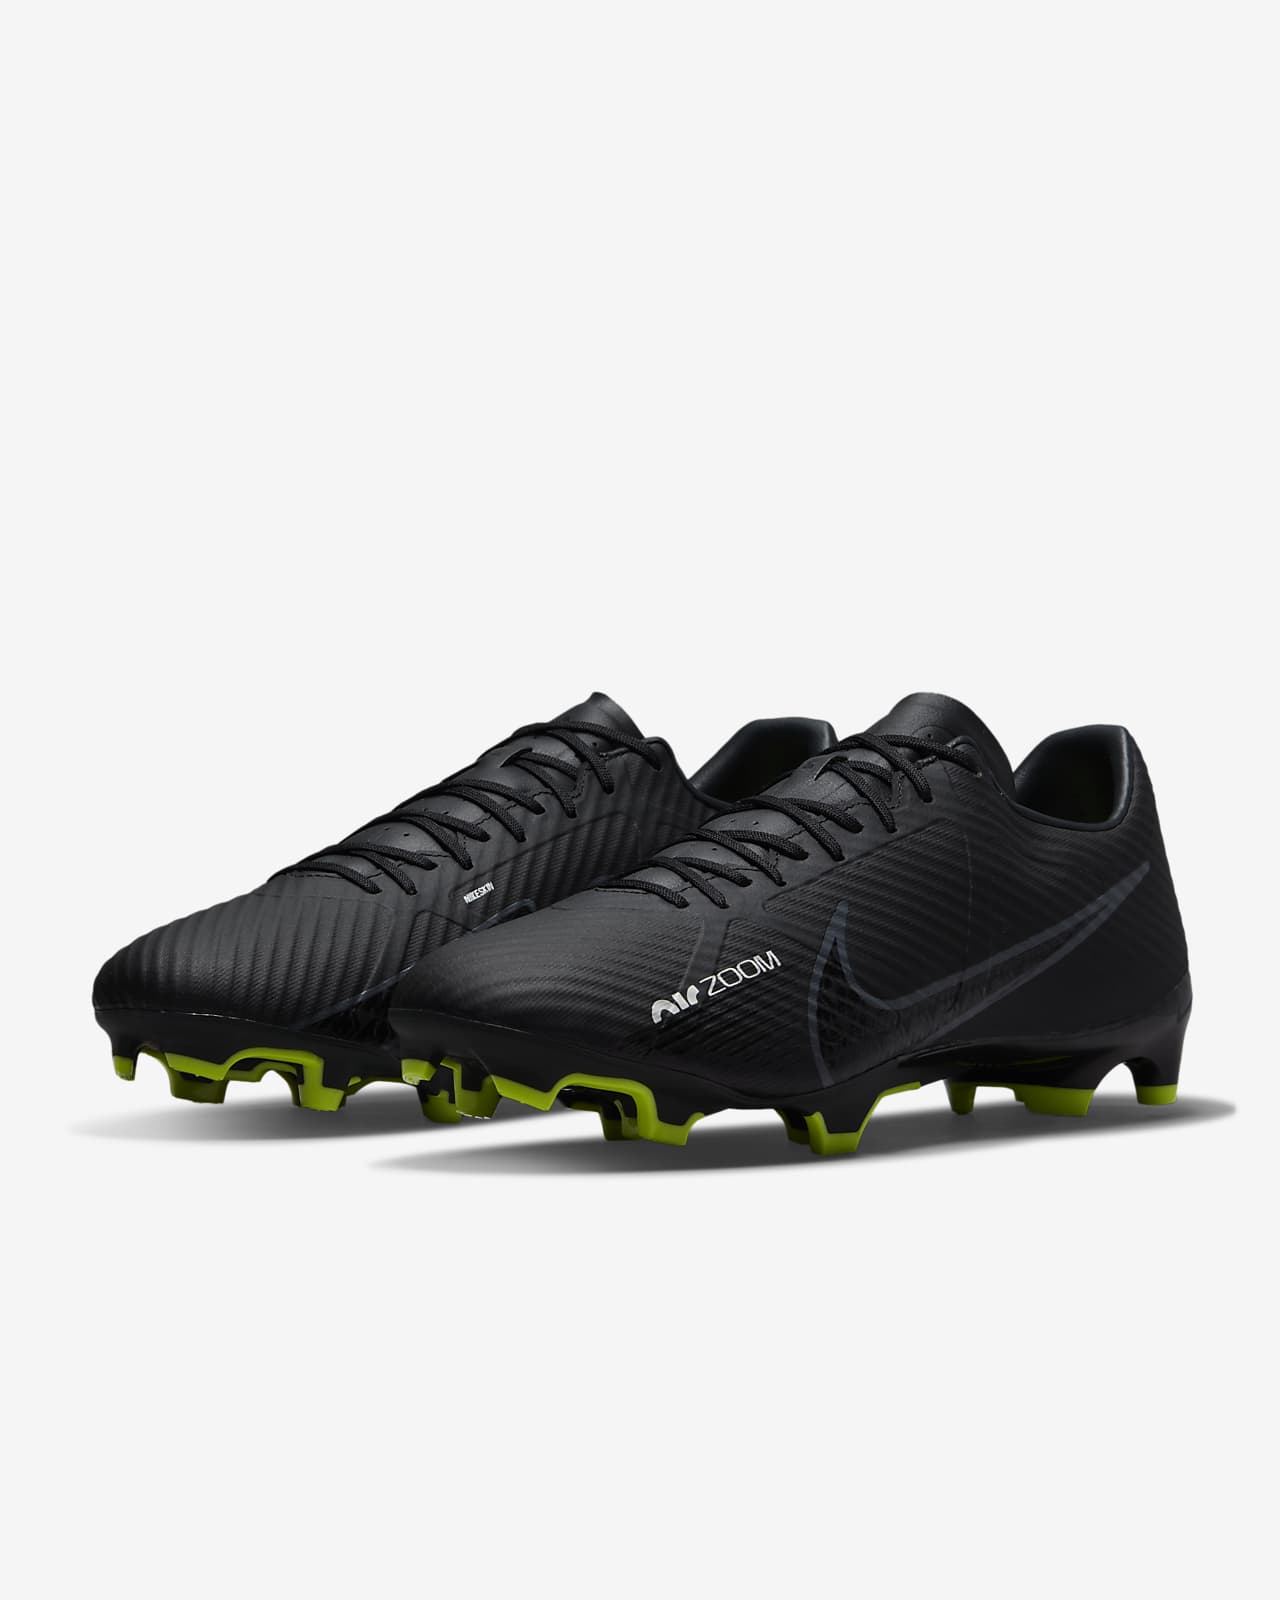 Nike Zoom Mercurial Vapor 15 Elite FG Firm Ground Soccer Cleats | lupon ...